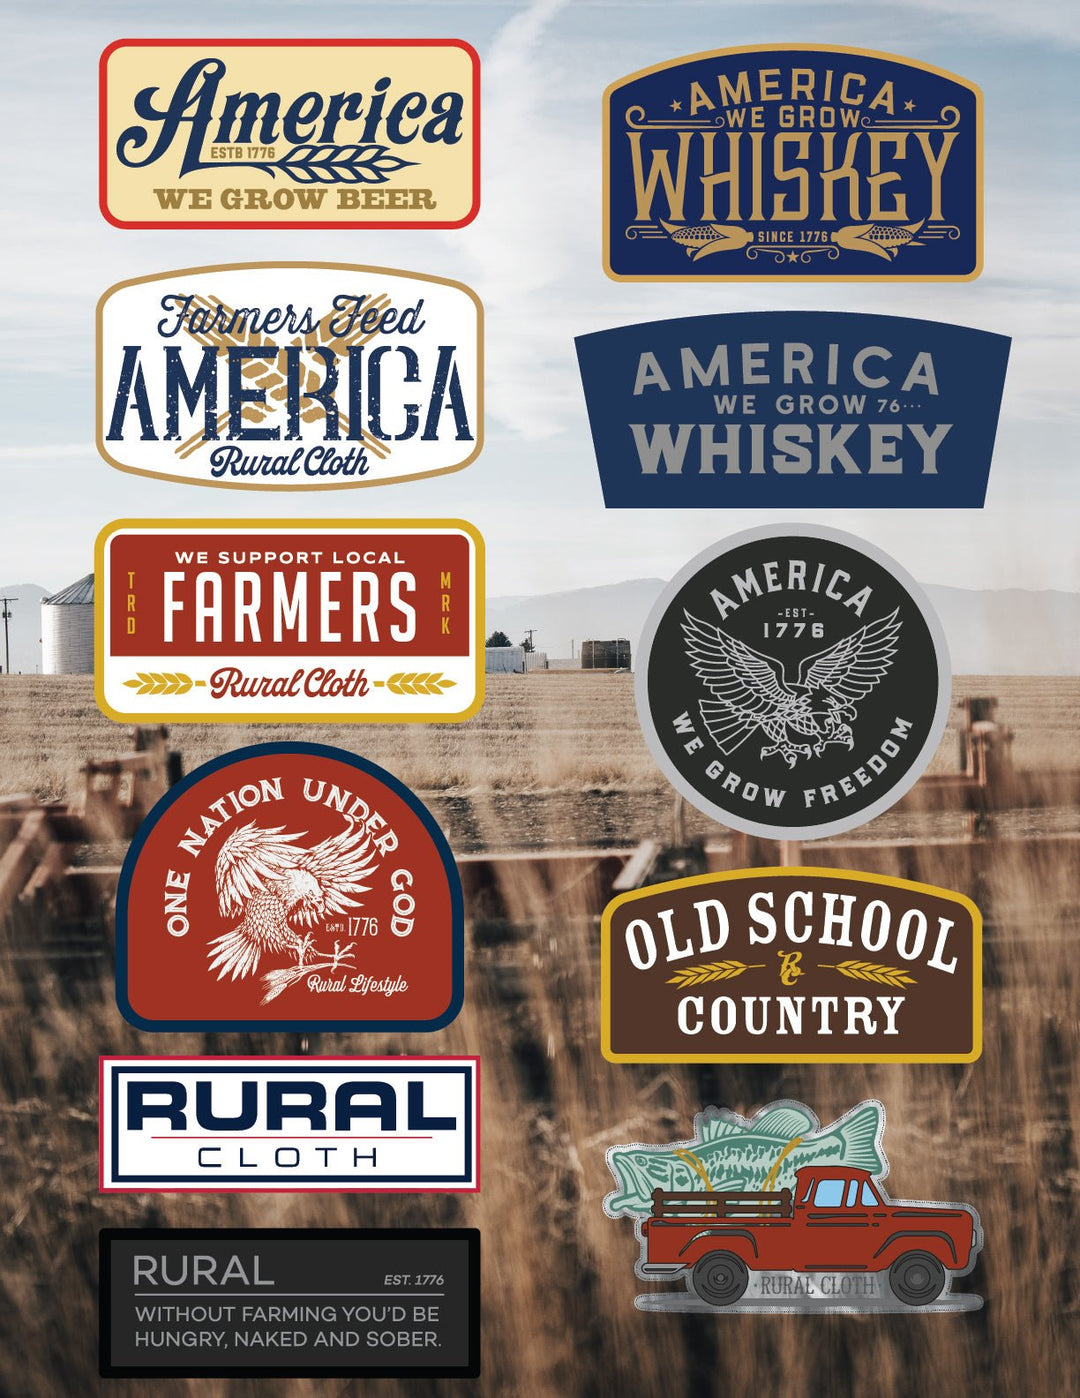 A collage featuring an array of vintage-inspired labels and logos with phrases such as "America We Grow Beer", "America We Grow Whiskey", "Farmers Feed America Rural Cloth", and "Old School Country". The backdrop displays a picturesque farm scene with sprawling fields and a classic red truck, perfectly encapsulating the essence of the Rural Life Decal Sheet by Rural Cloth.